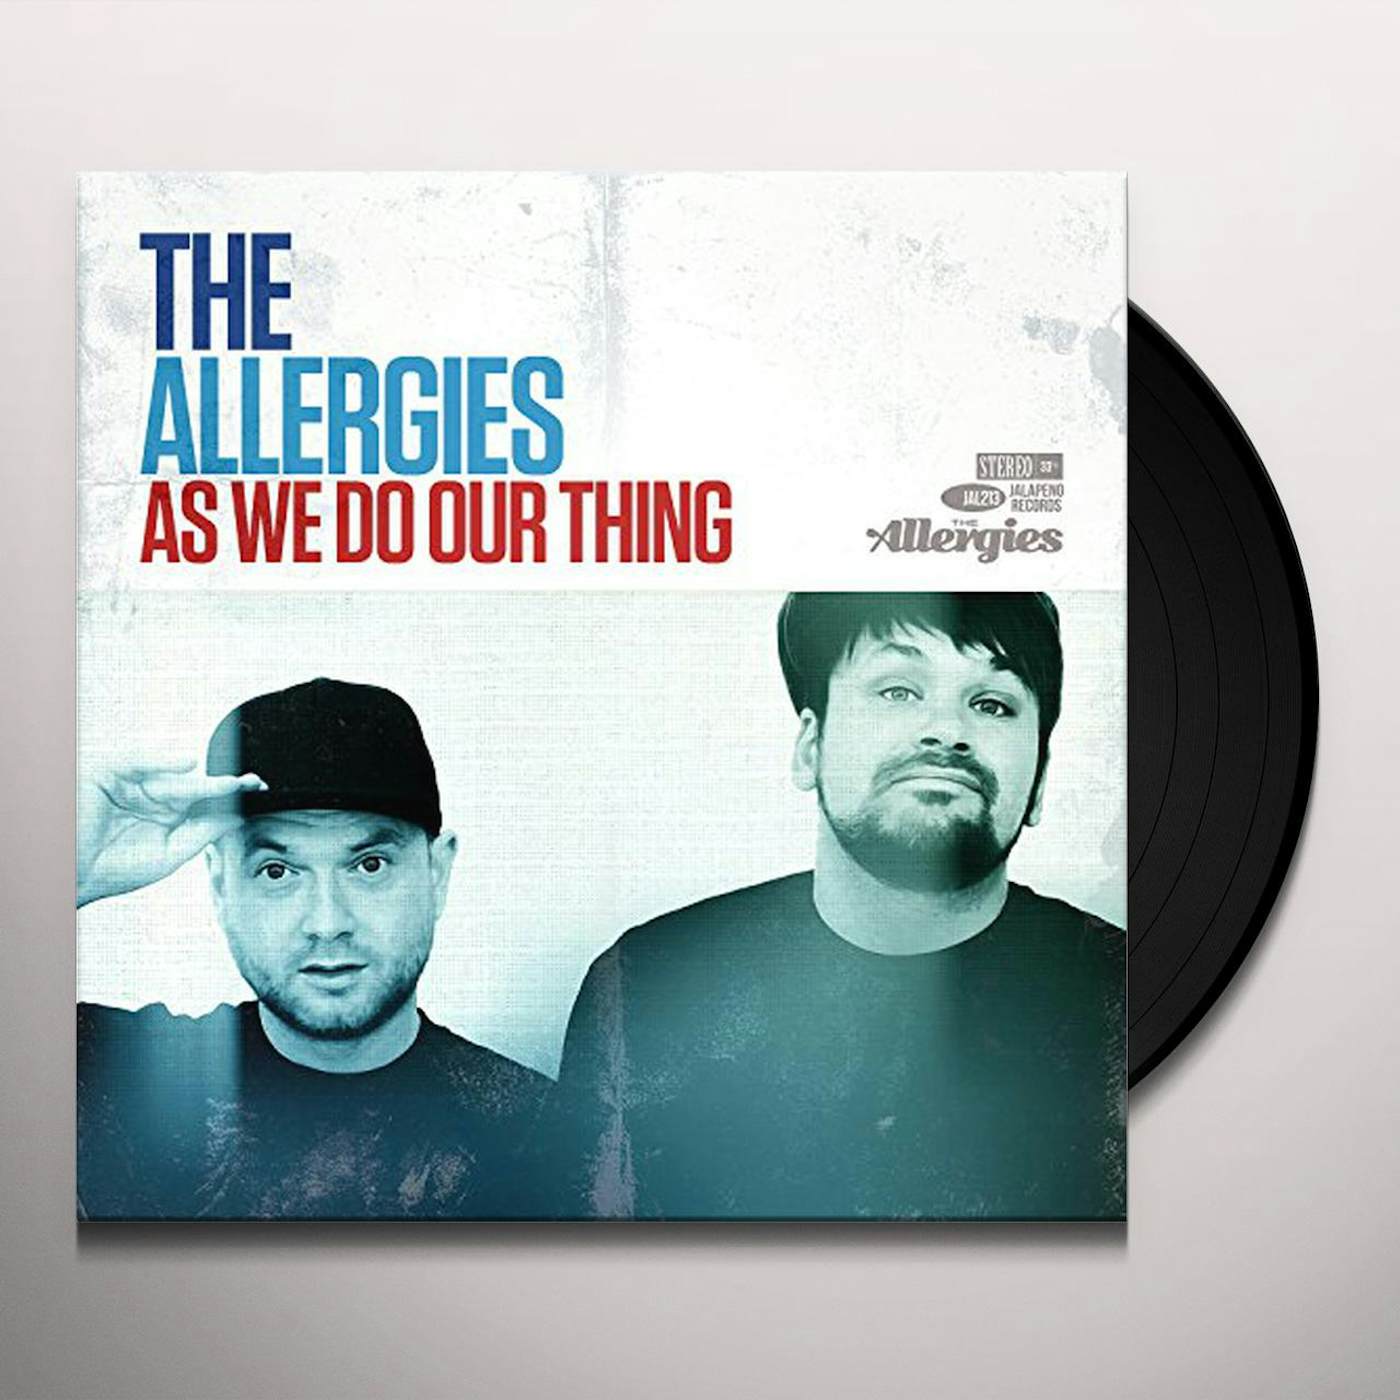 The Allergies AS WE DO OUR THING Vinyl Record